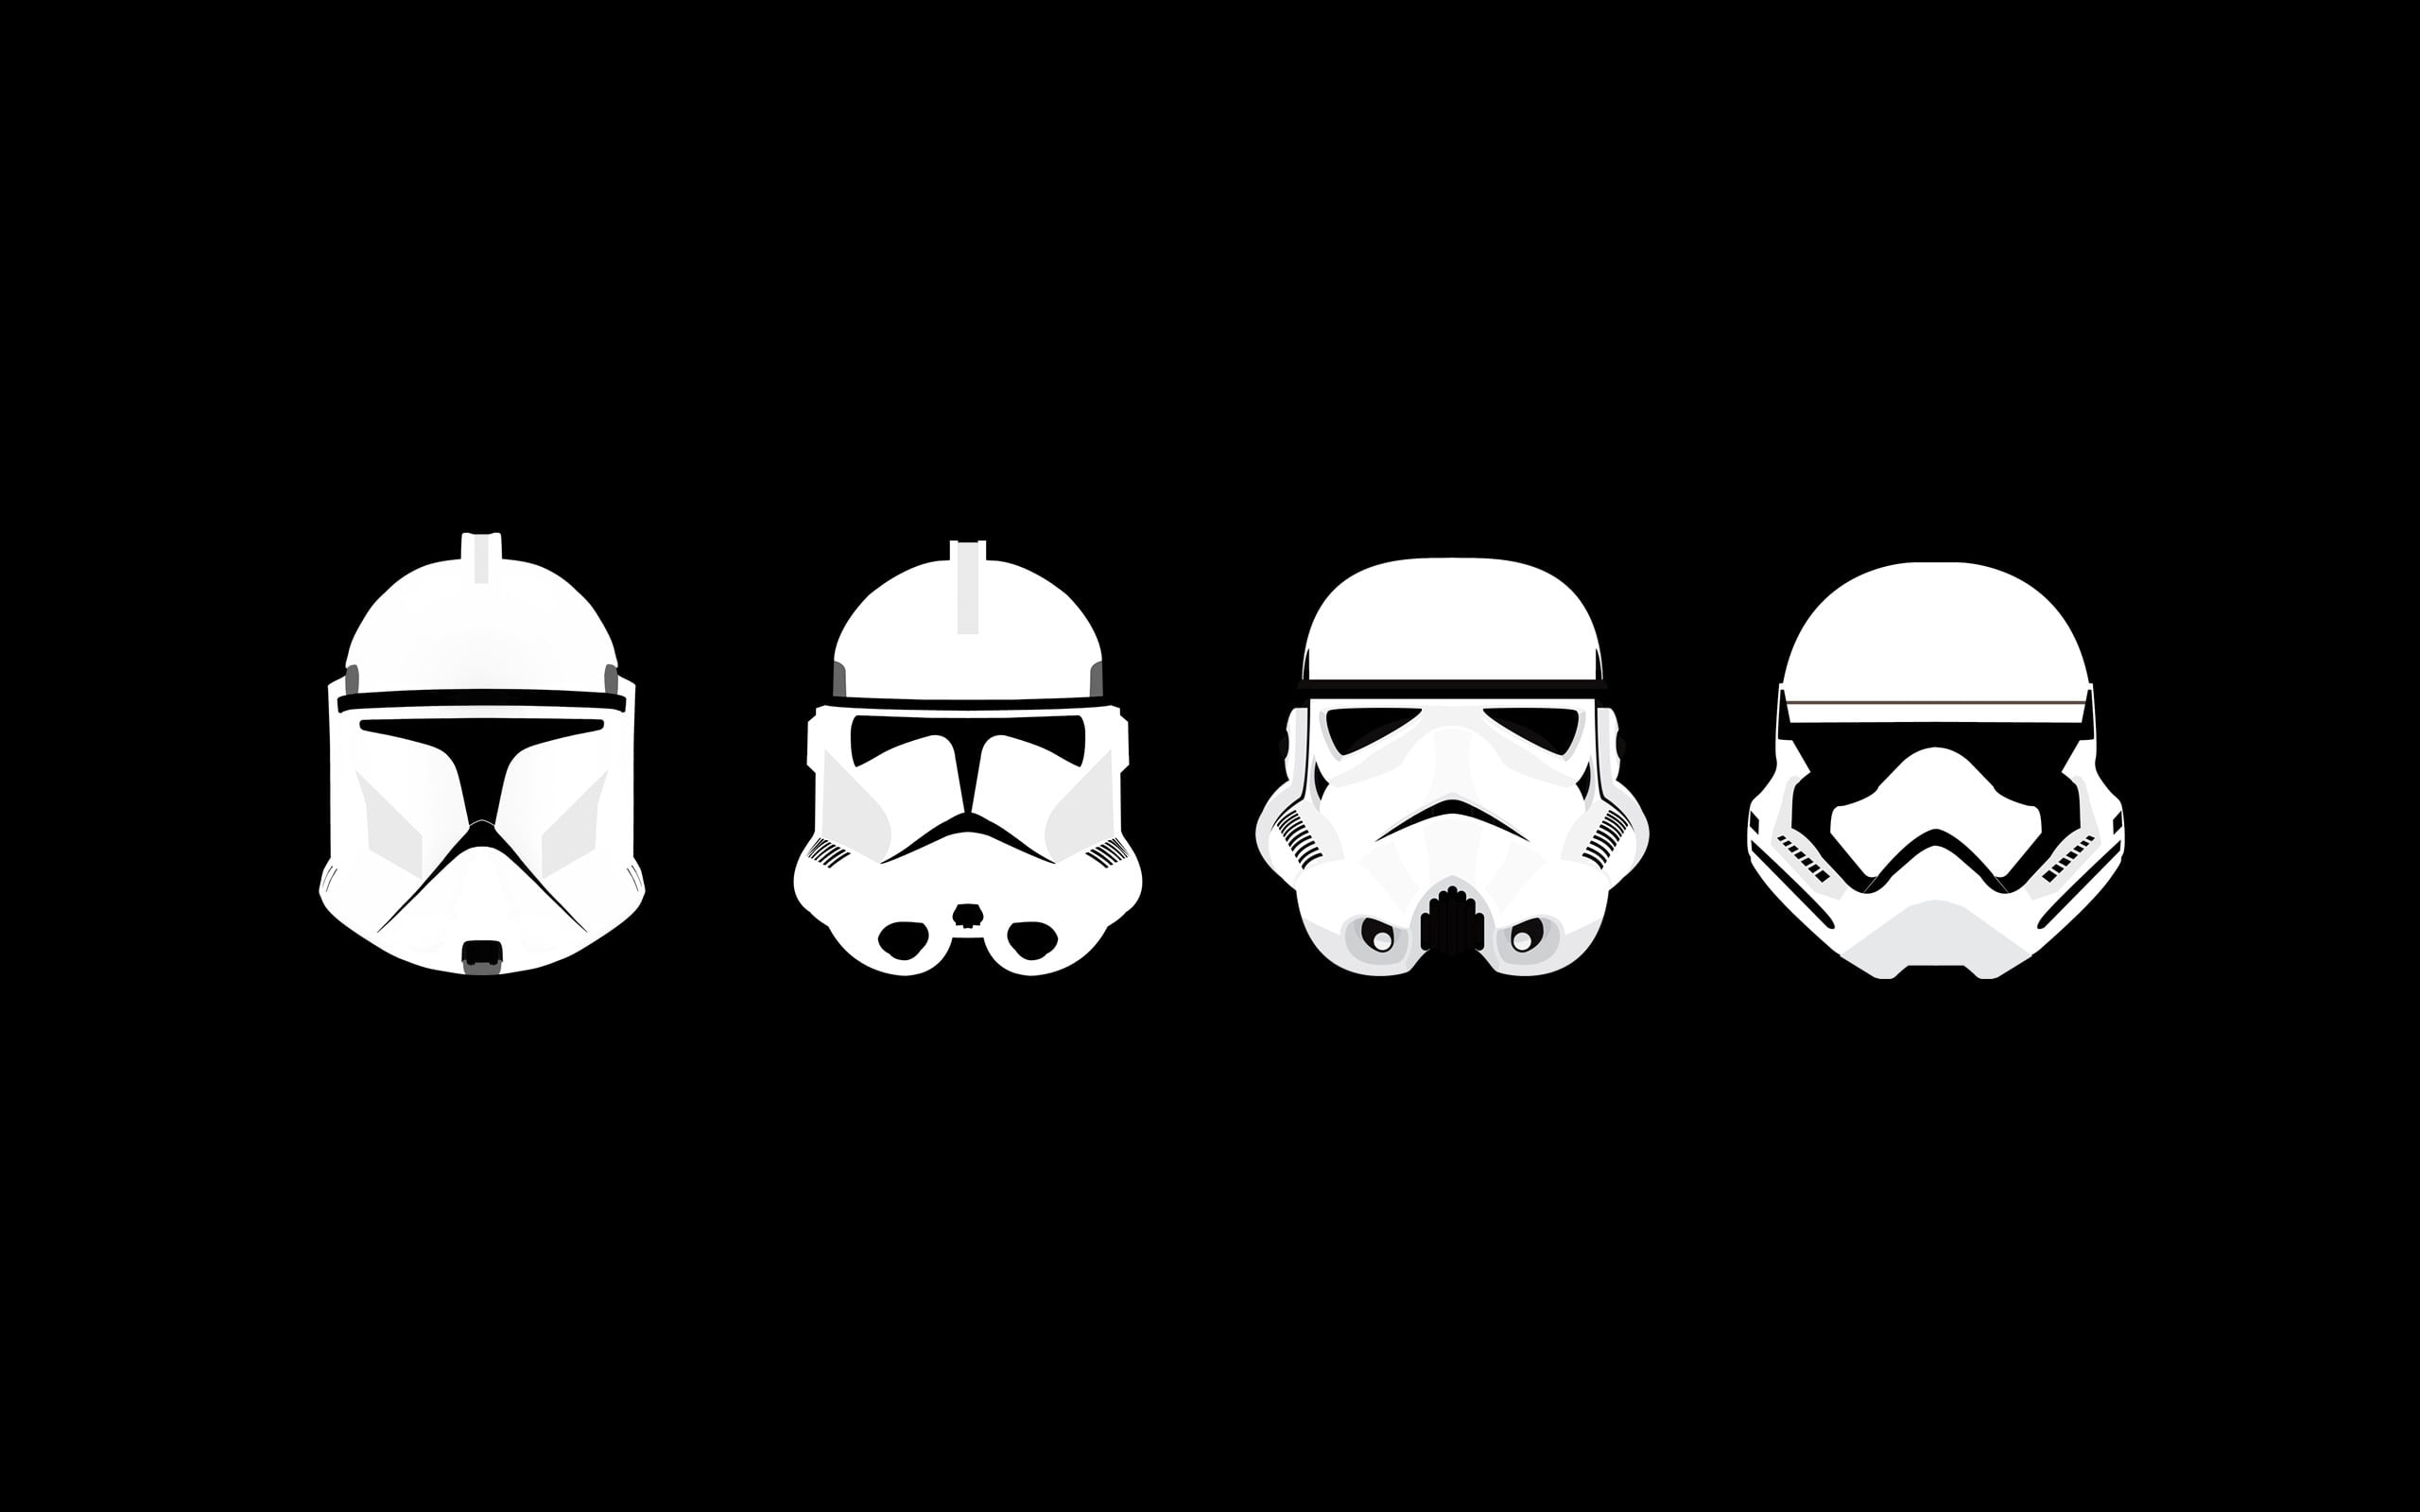 four Star Wars character icons